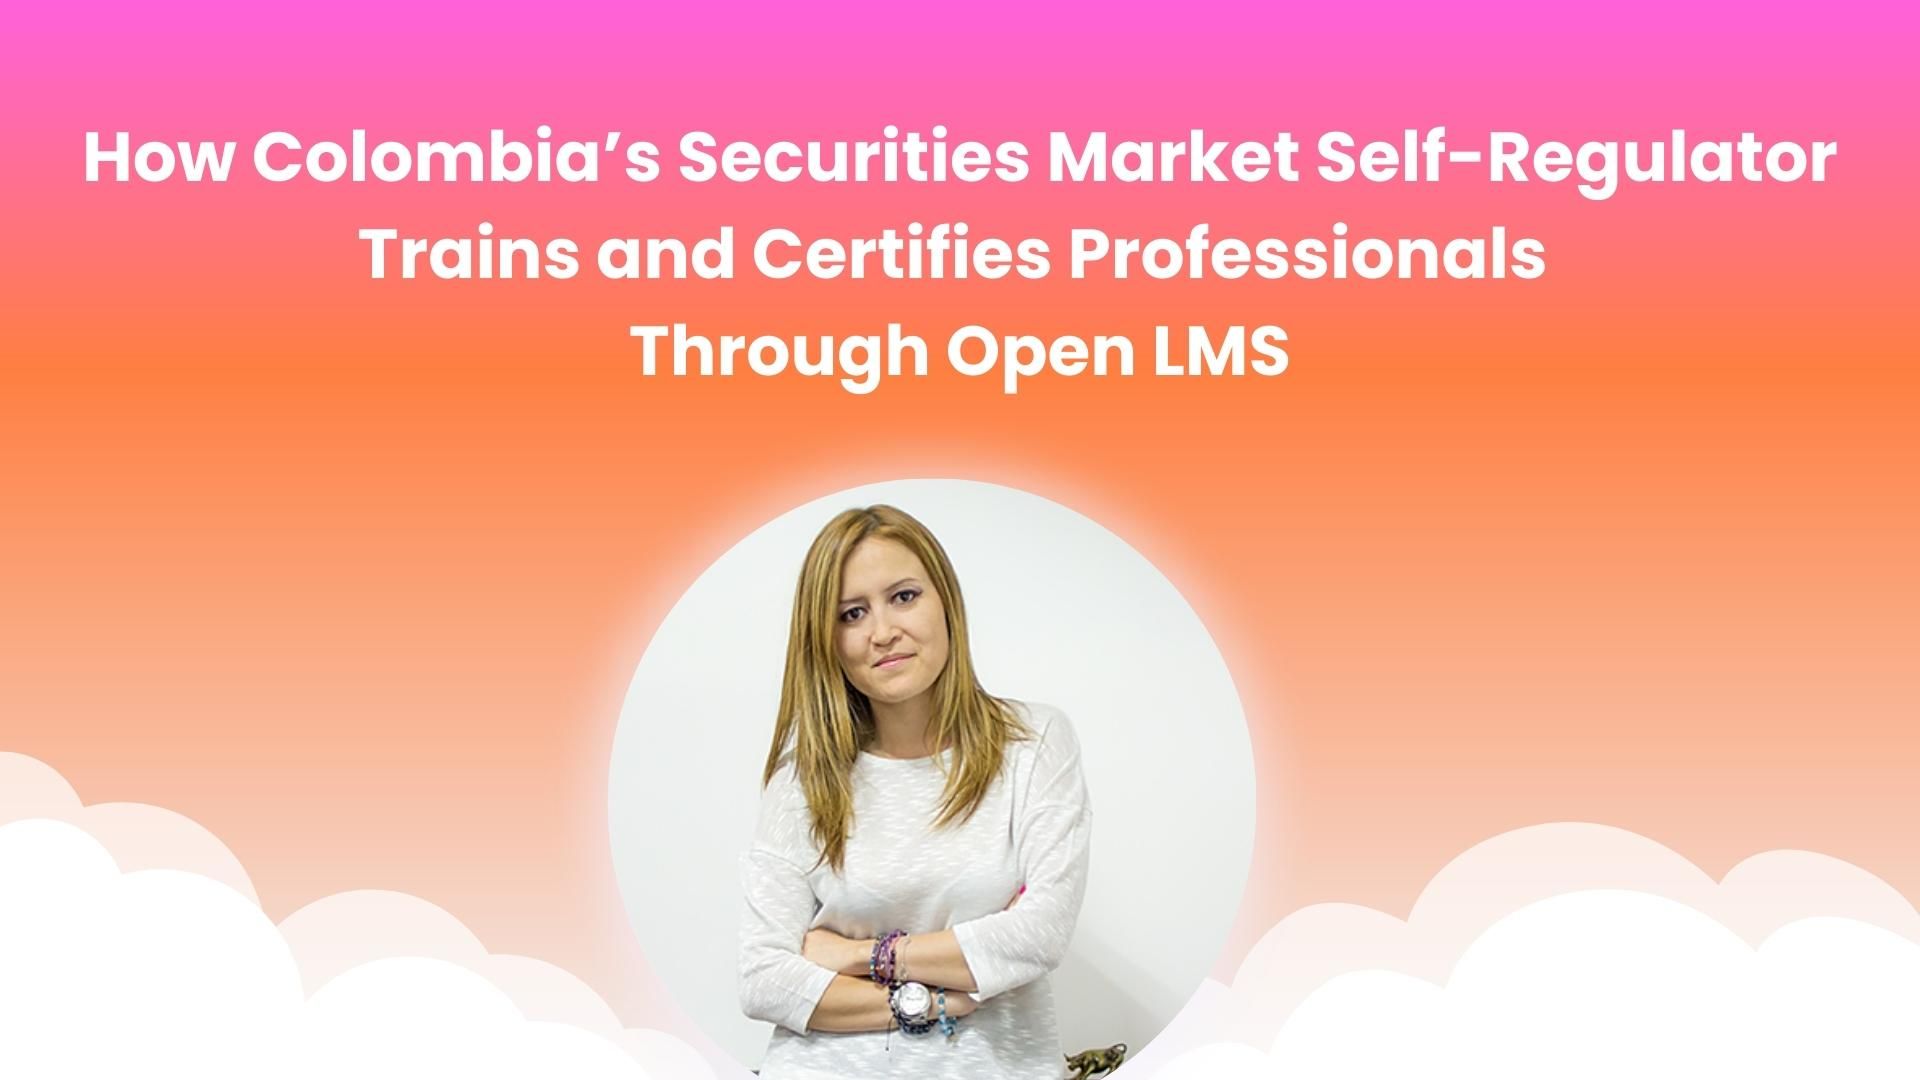 How Colombia’s Securities Market Self-Regulator Trains and Certifies Professionals Through Open LMS